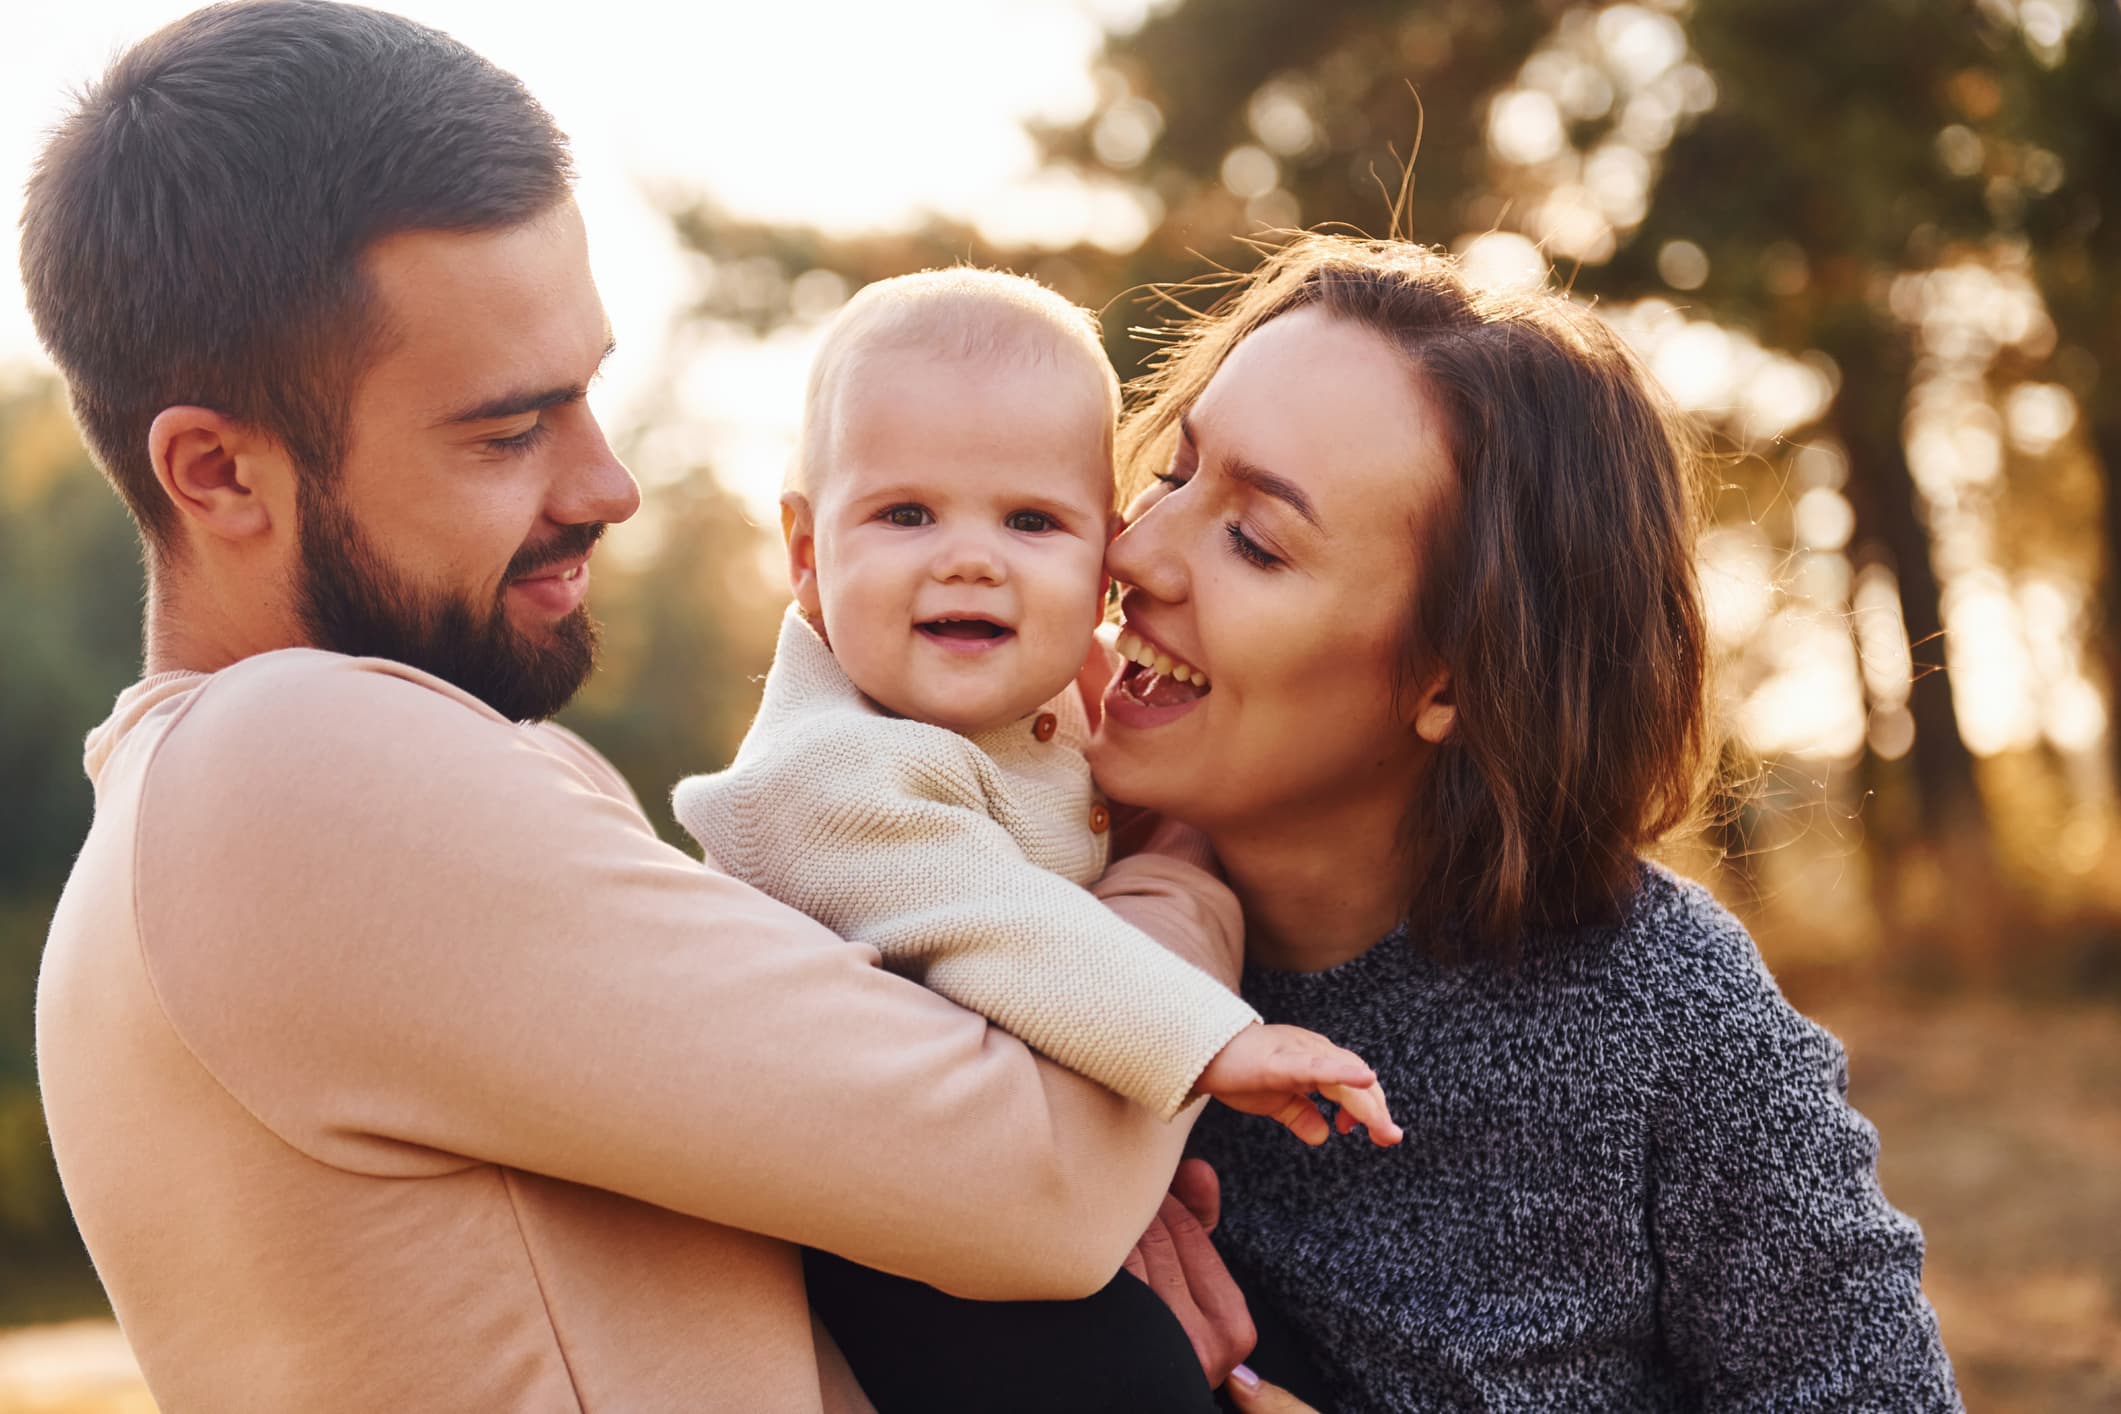 BTIG says this niche stock 'delivering the joy of parenthood' set for a 30% gain